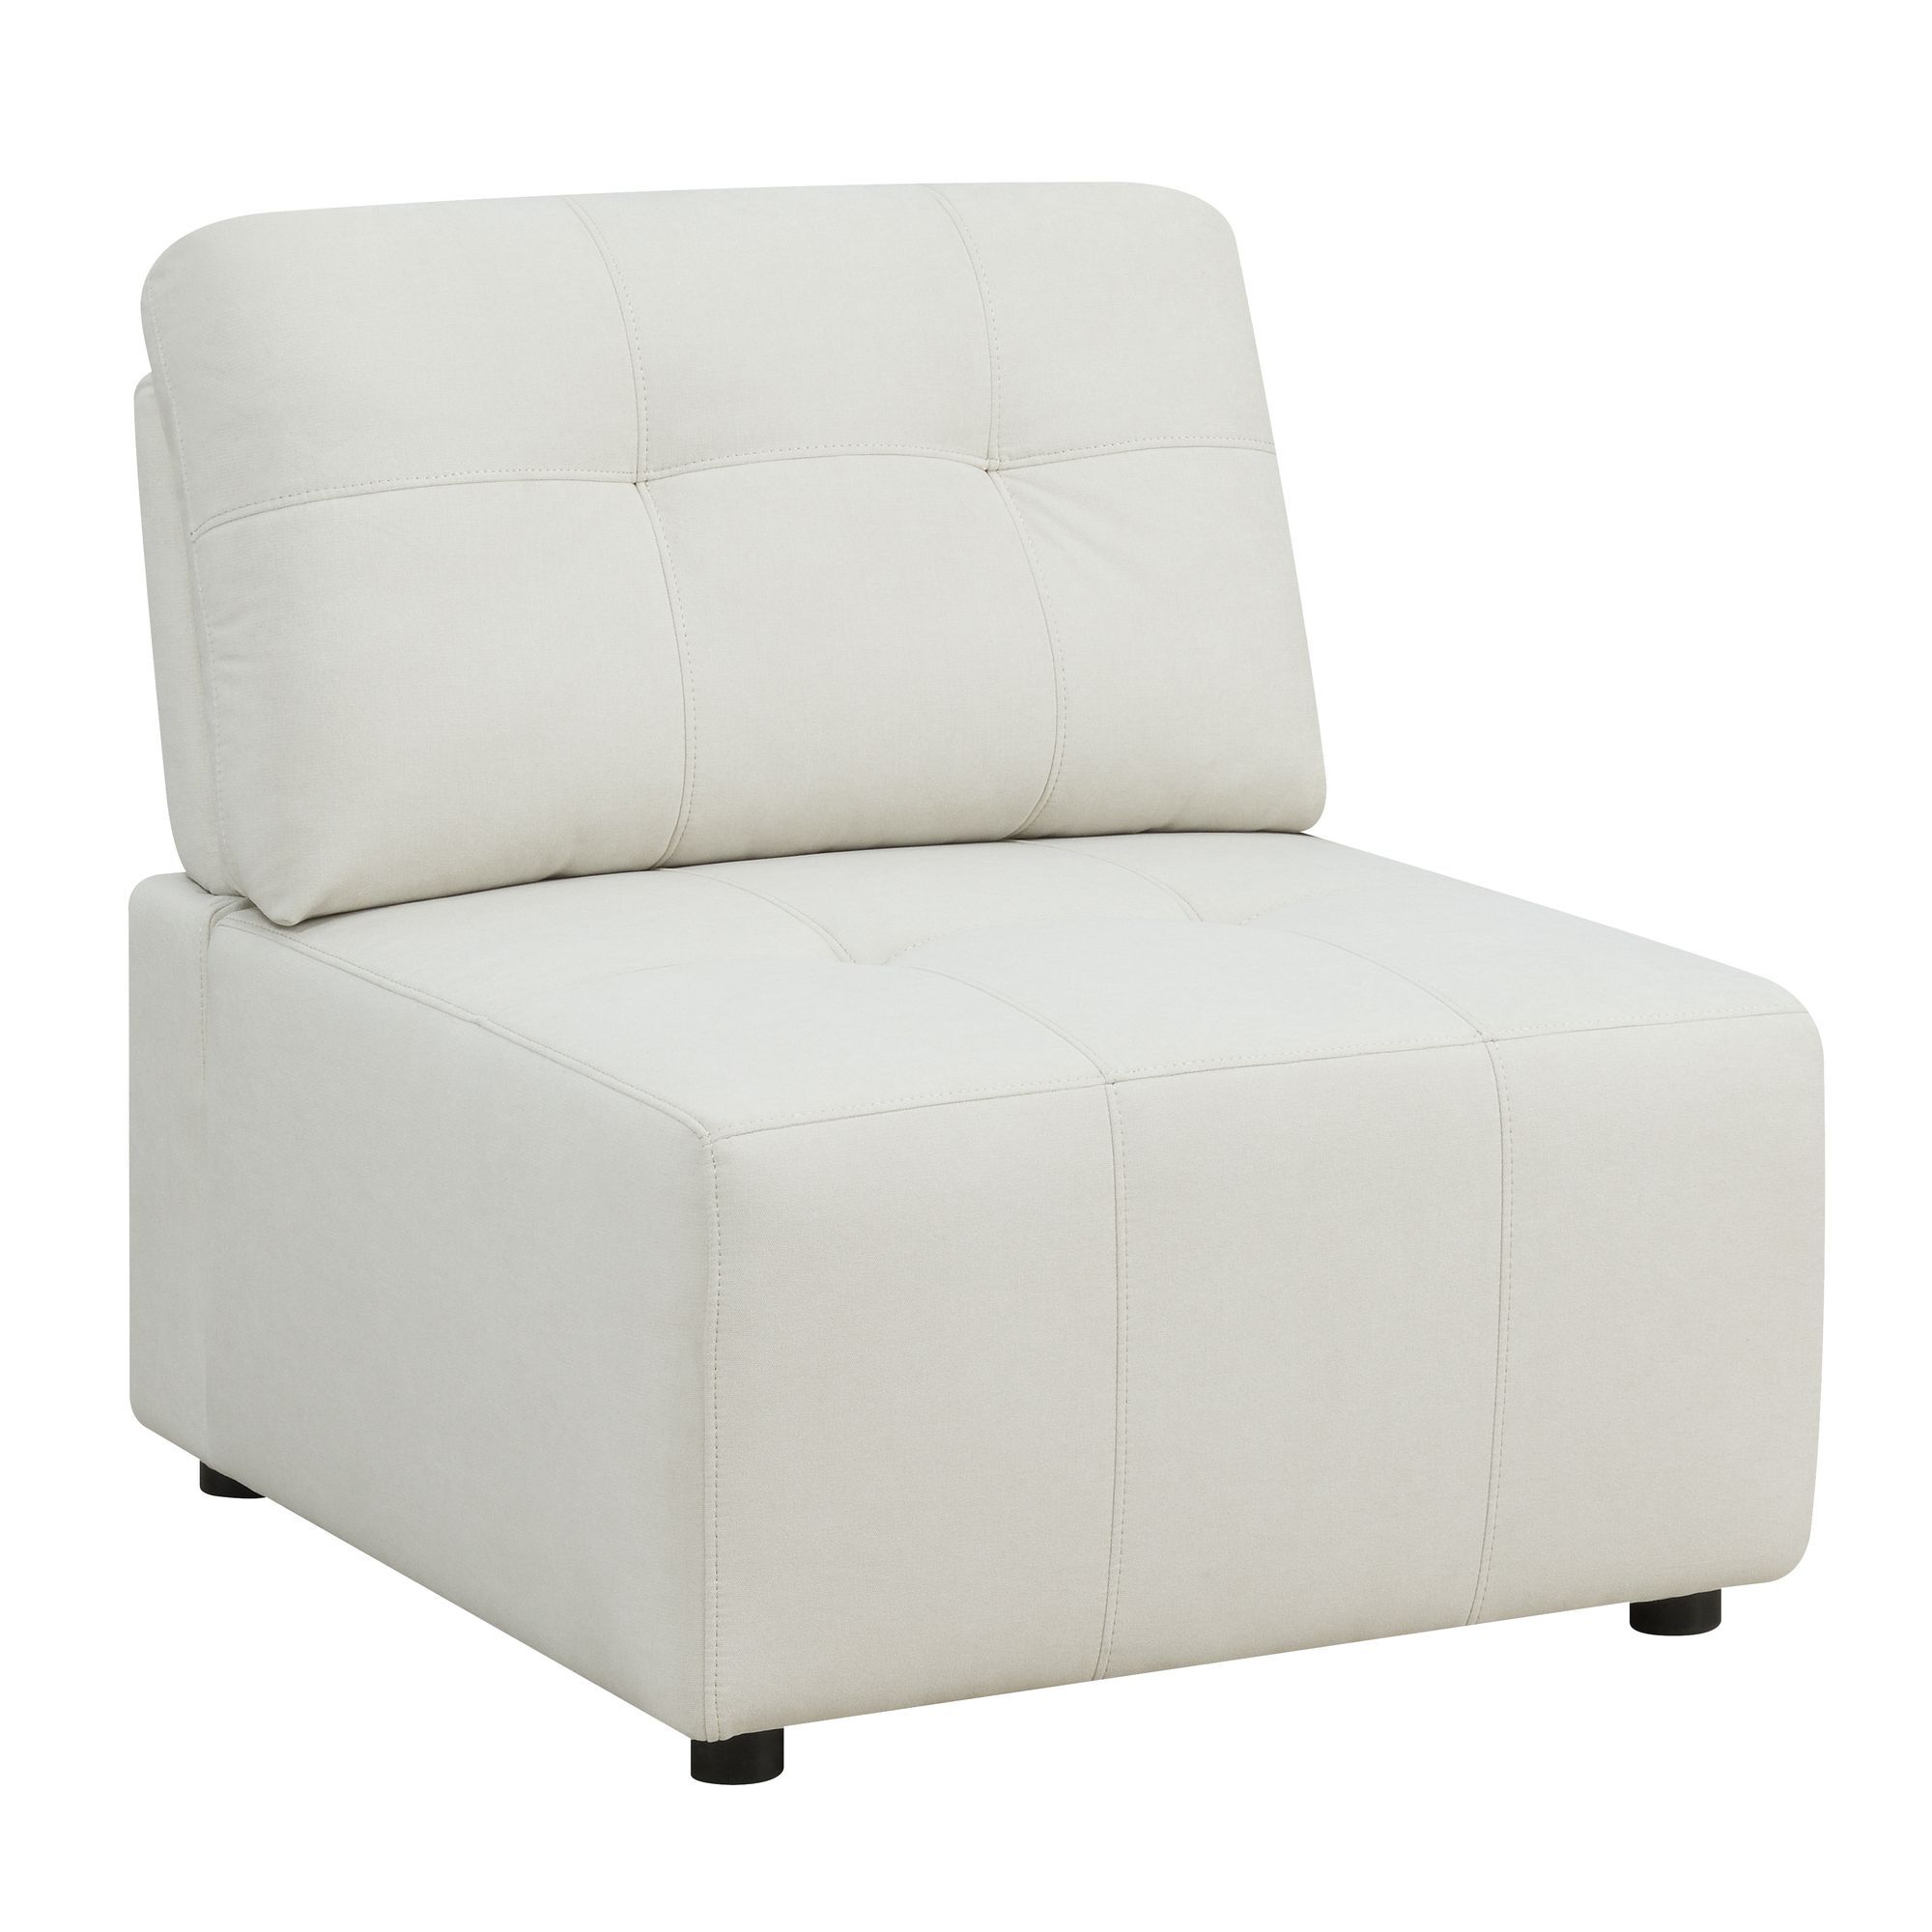 Oorzaak Subtropisch natuurlijk Picket House Furnishings Gianni Modern Natural Polyester/Blend Sectional in  the Couches, Sofas & Loveseats department at Lowes.com